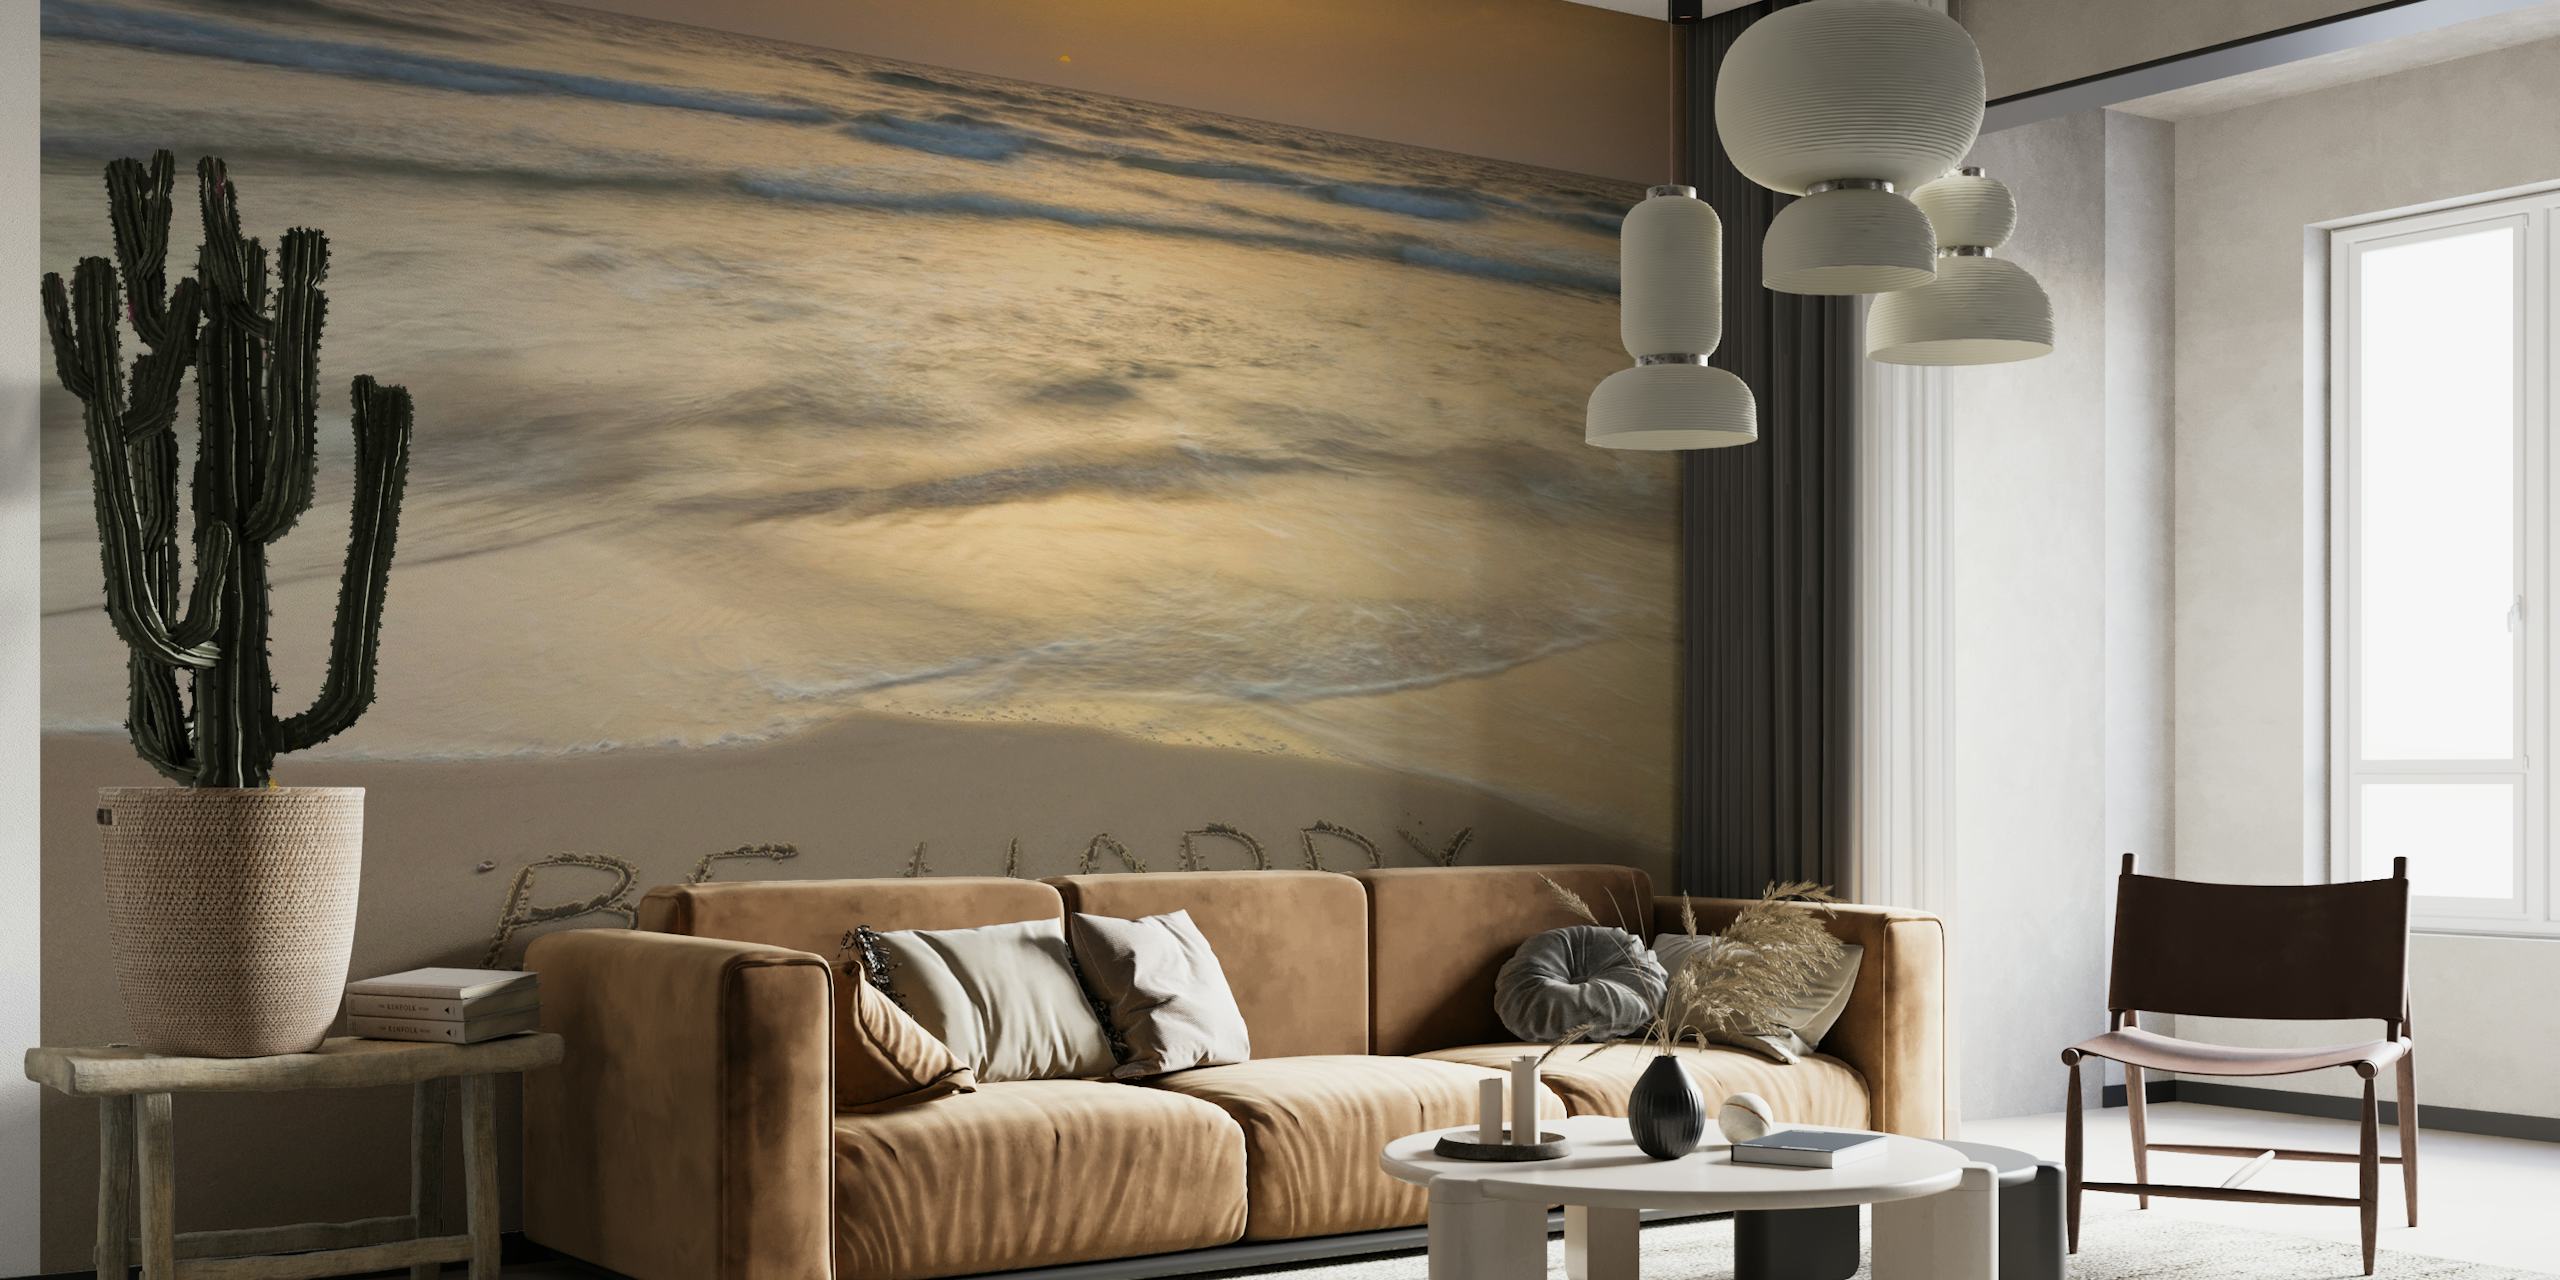 Tranquil beach scene with sand writing wall mural